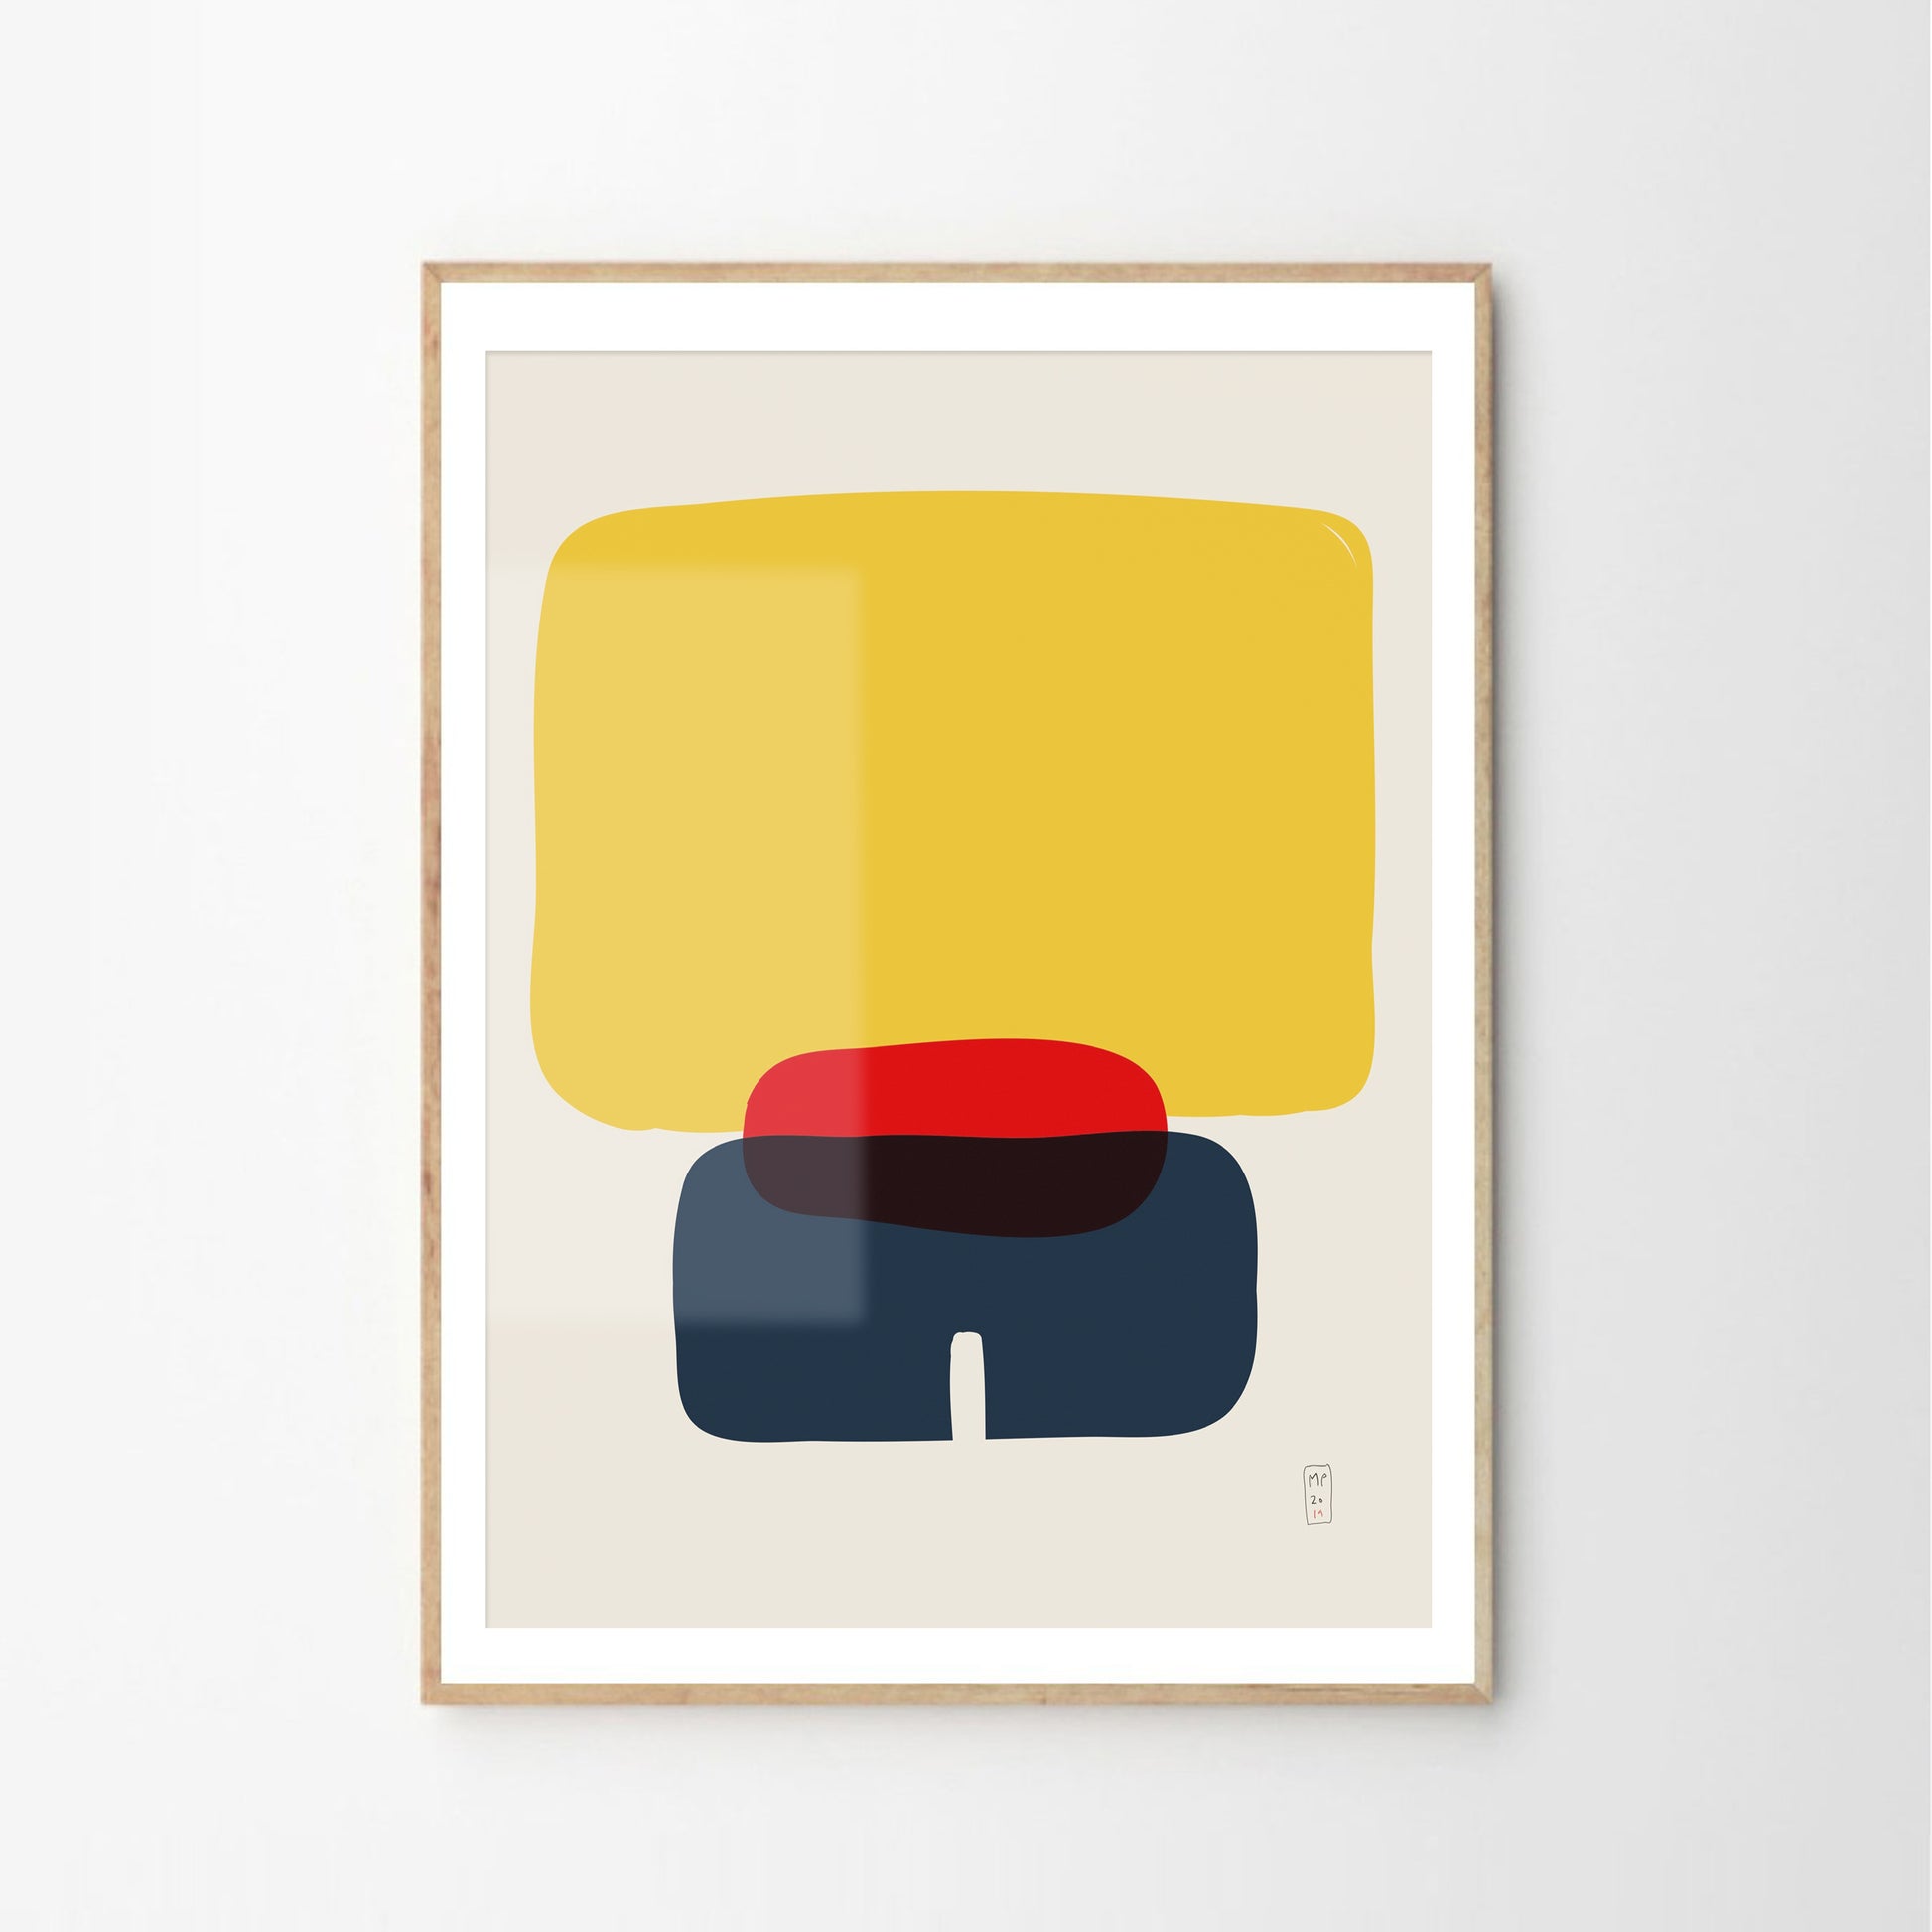 Minimalist art prints made with yellow, blue and red shapes, framed, Giclée print, framed, Hahnemühle Photo Rag paper stock, archival quality for 100+ years